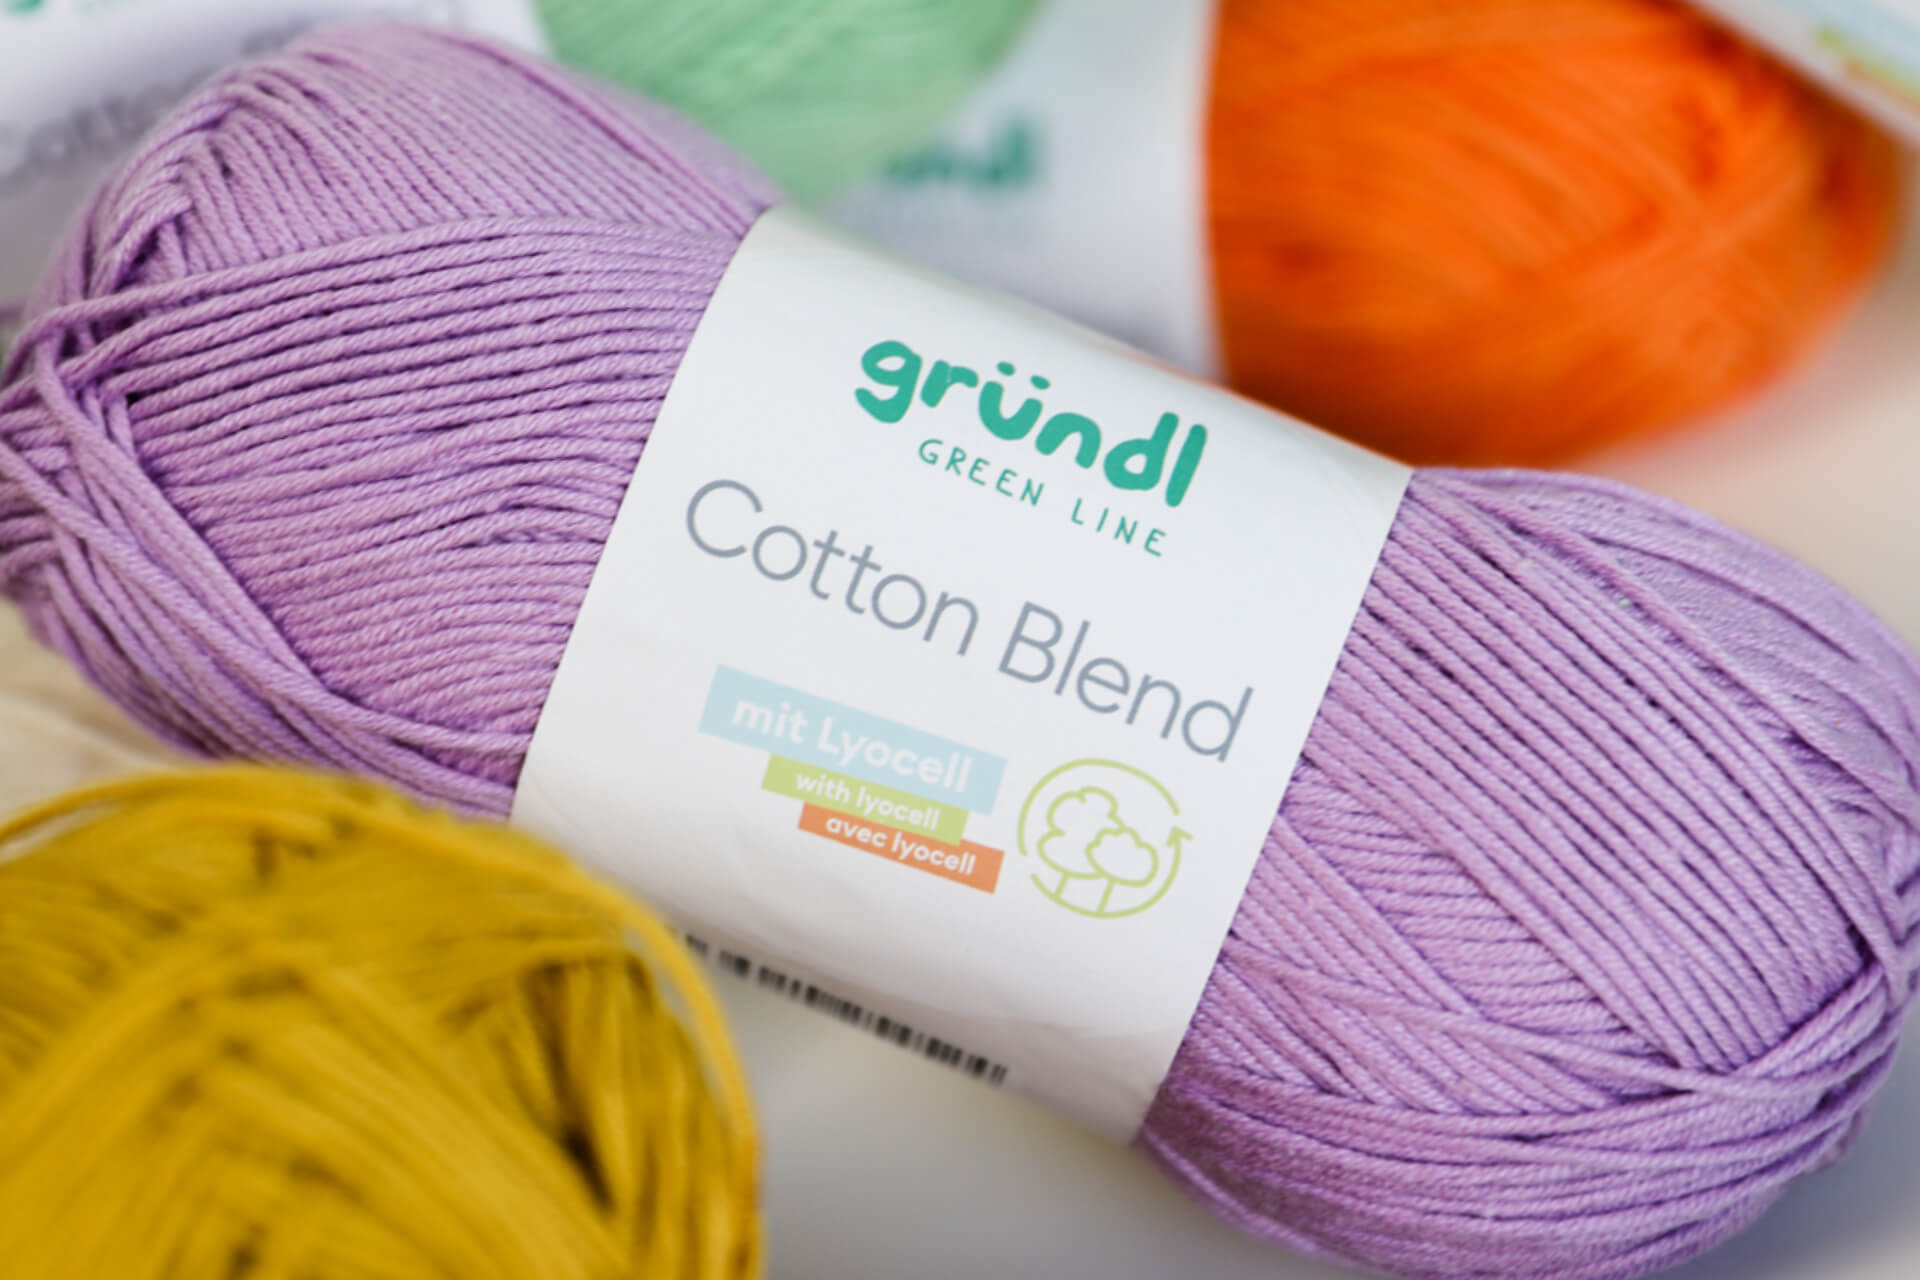 Gründl Wolle Cotton Blend in Lila